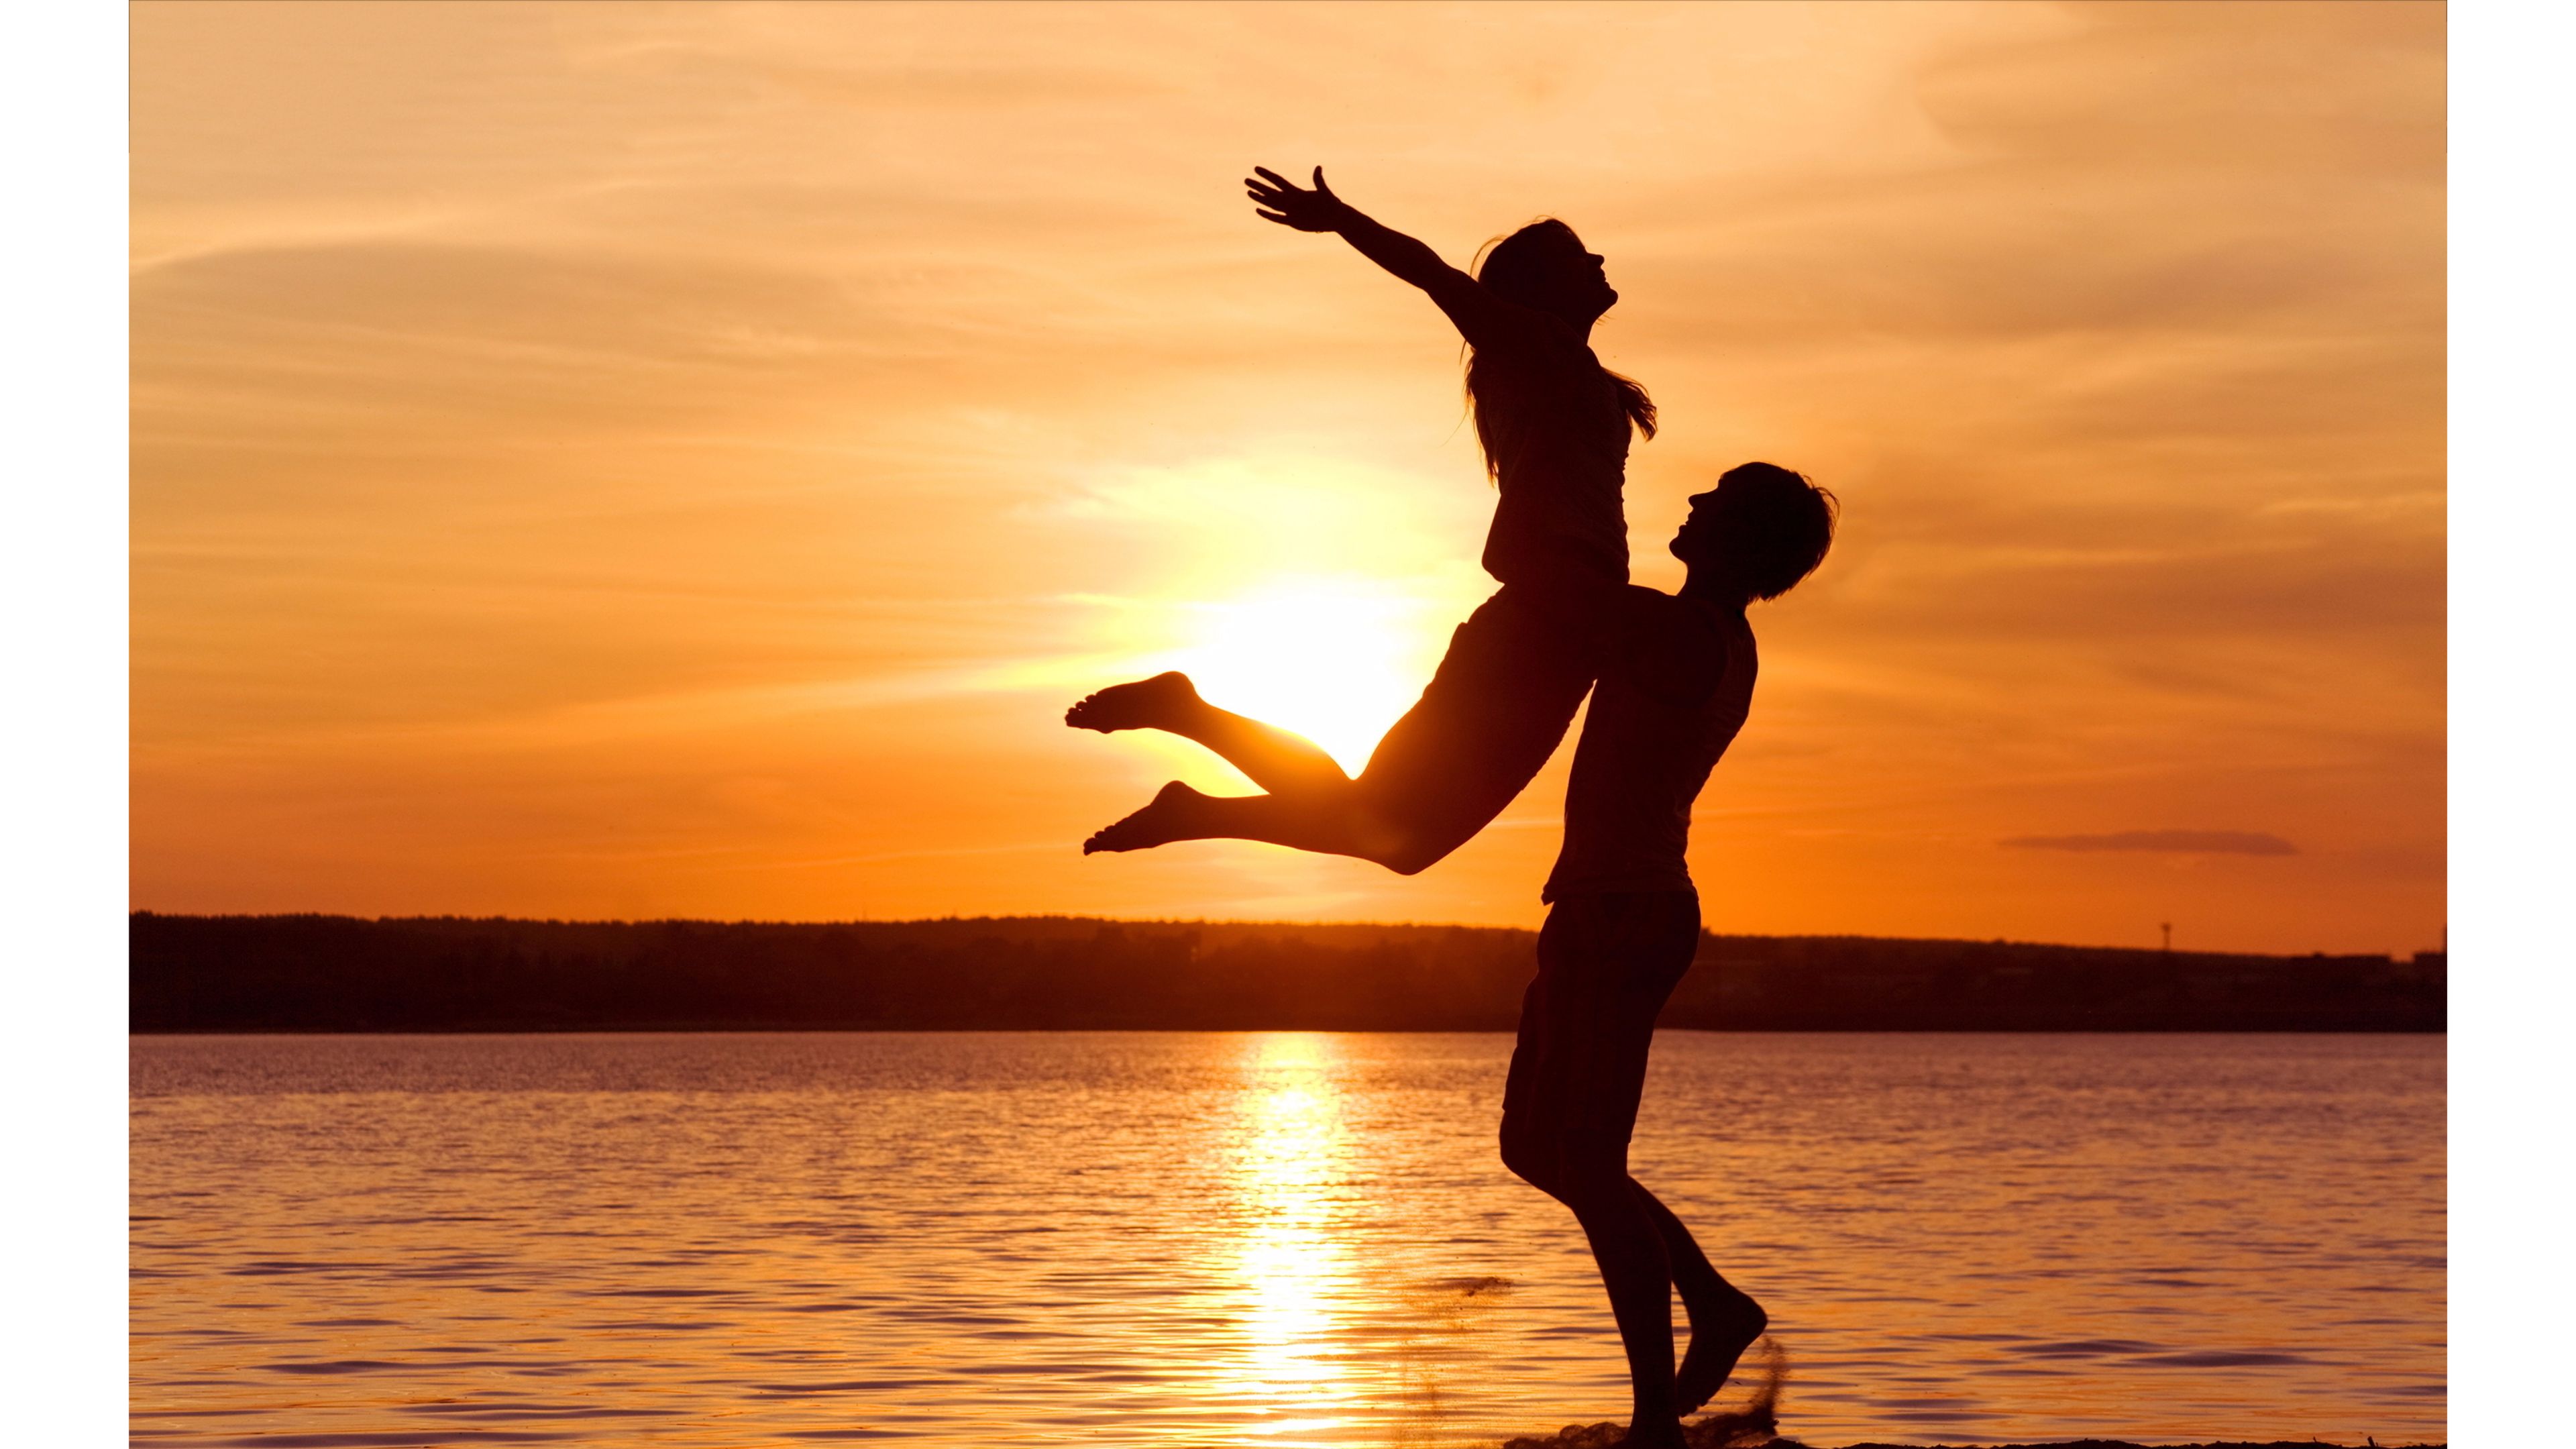 best romantic wallpapers,people in nature,happy,sky,jumping,fun